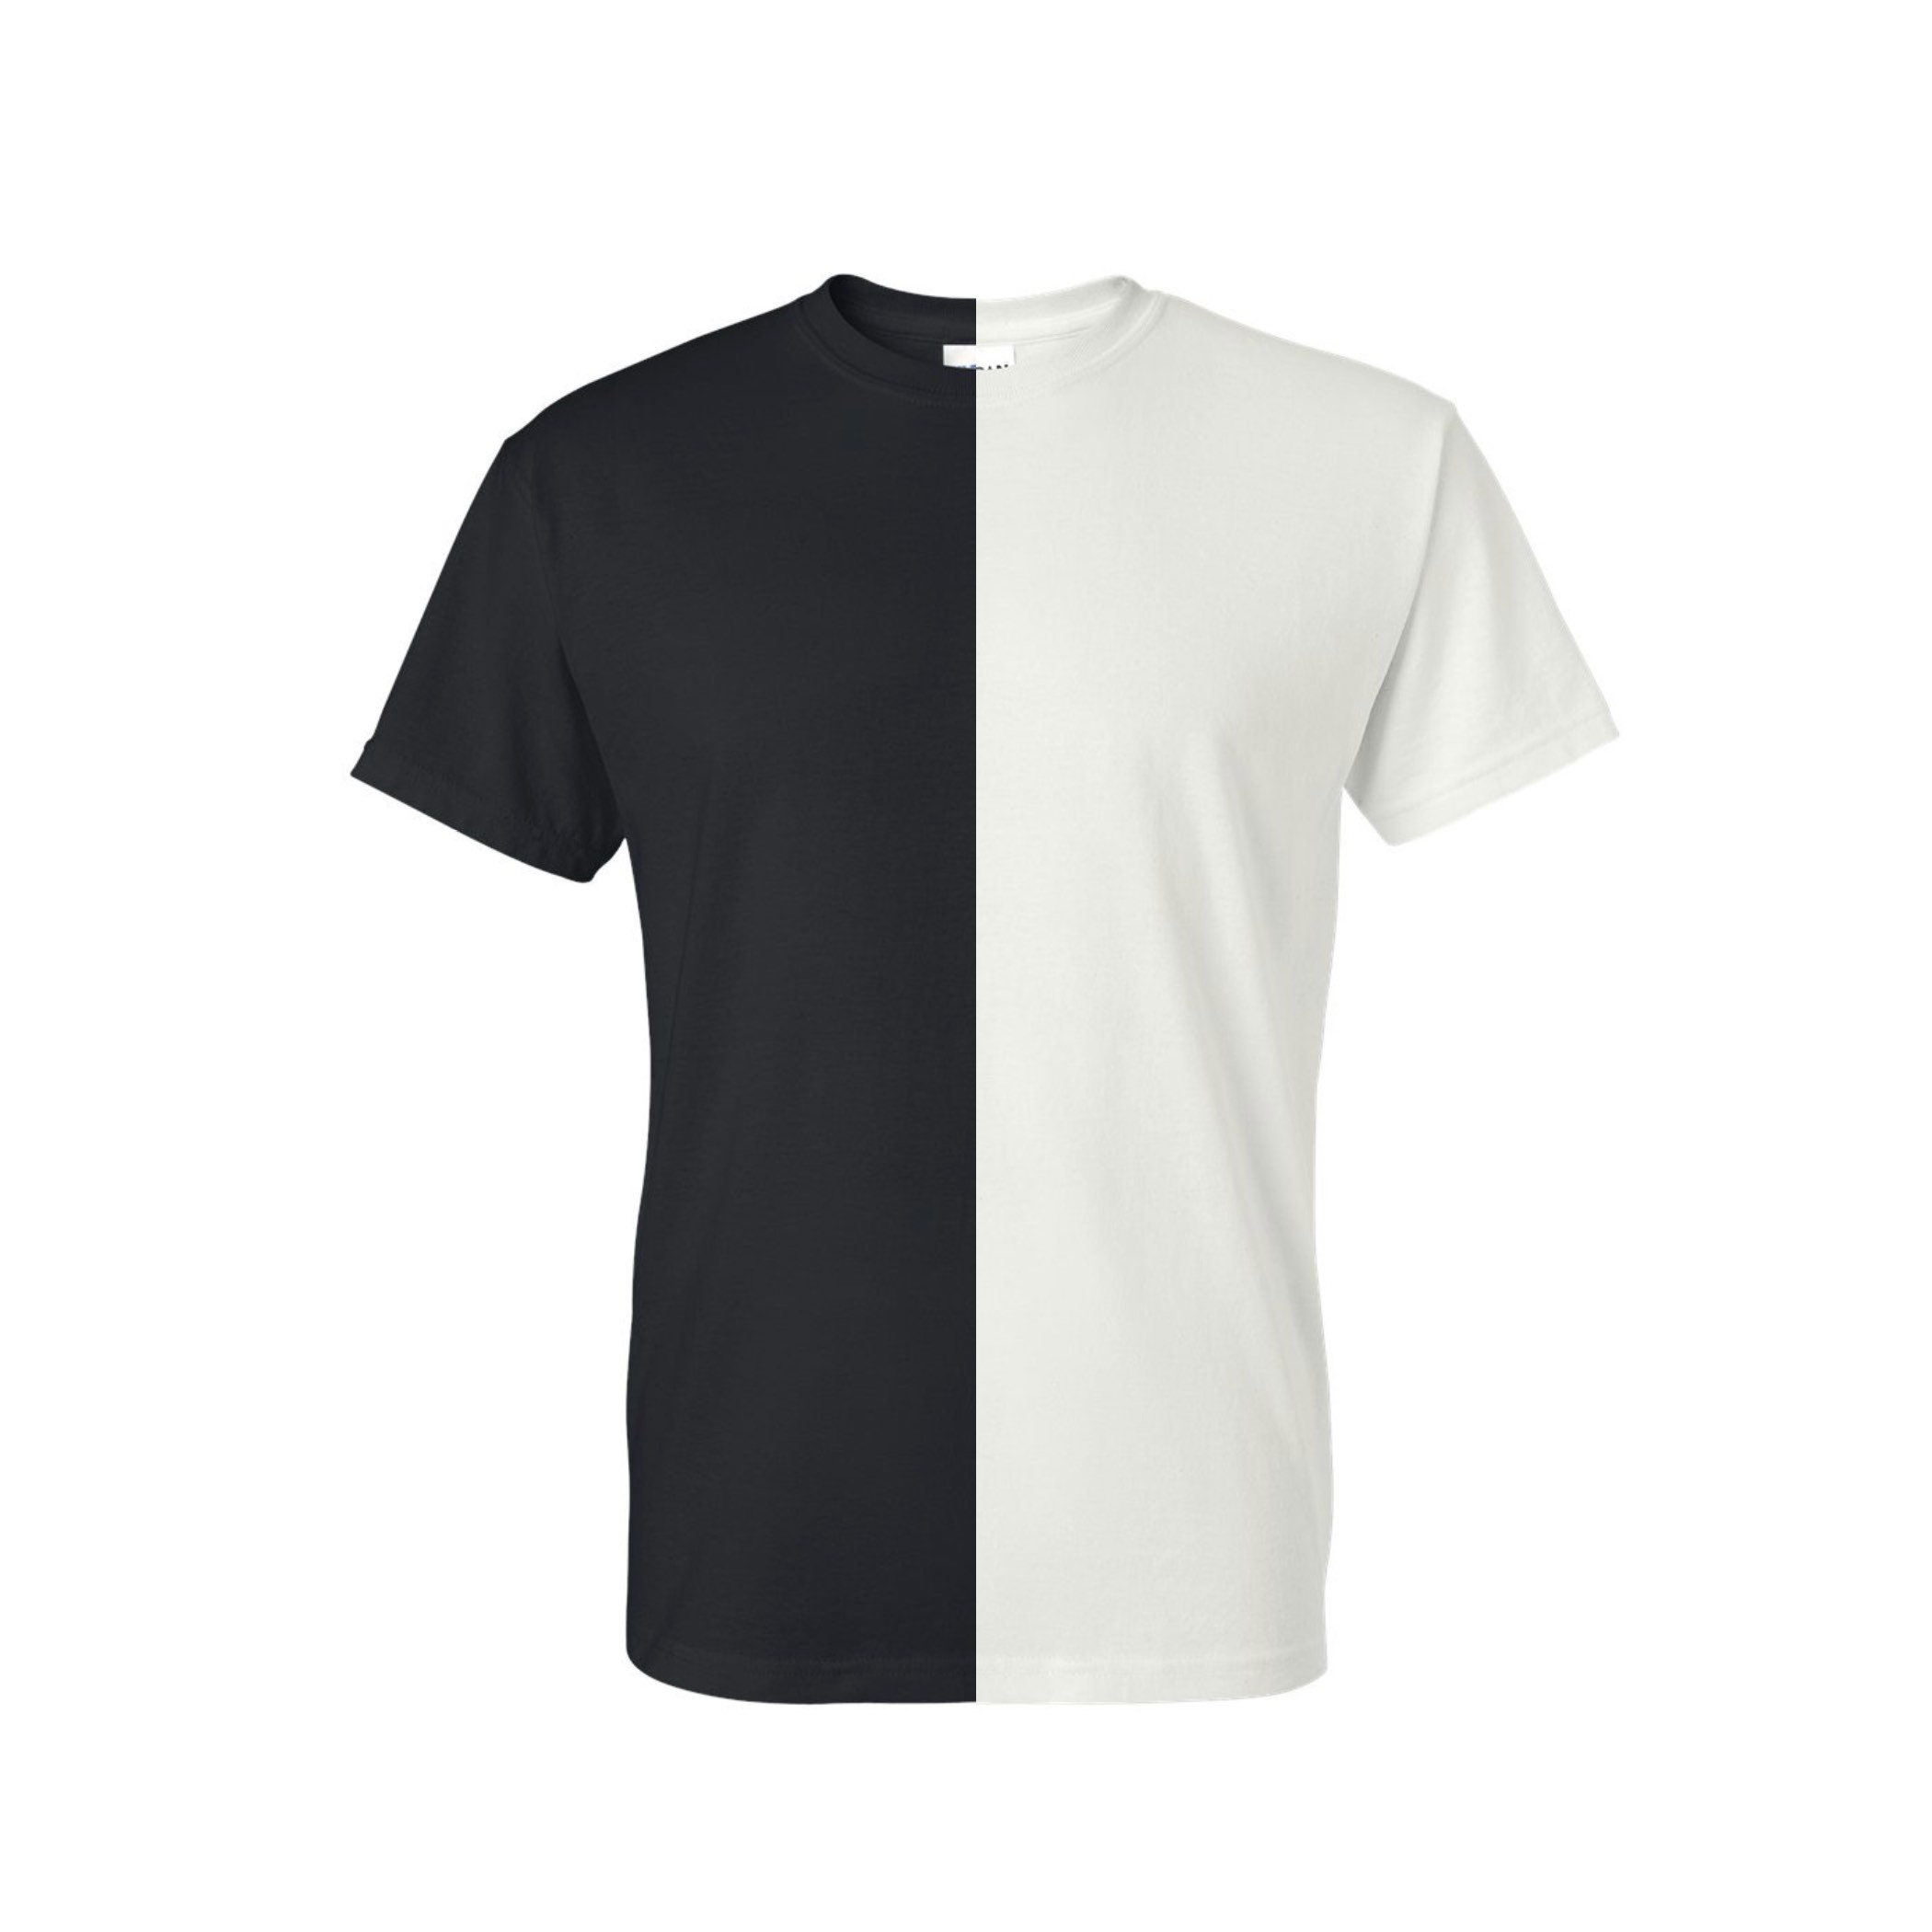 SplitandStitch Black and White Adult Split Tee | Two-Toned Shirt | Two-Colored Shirt | Half and Half Tee